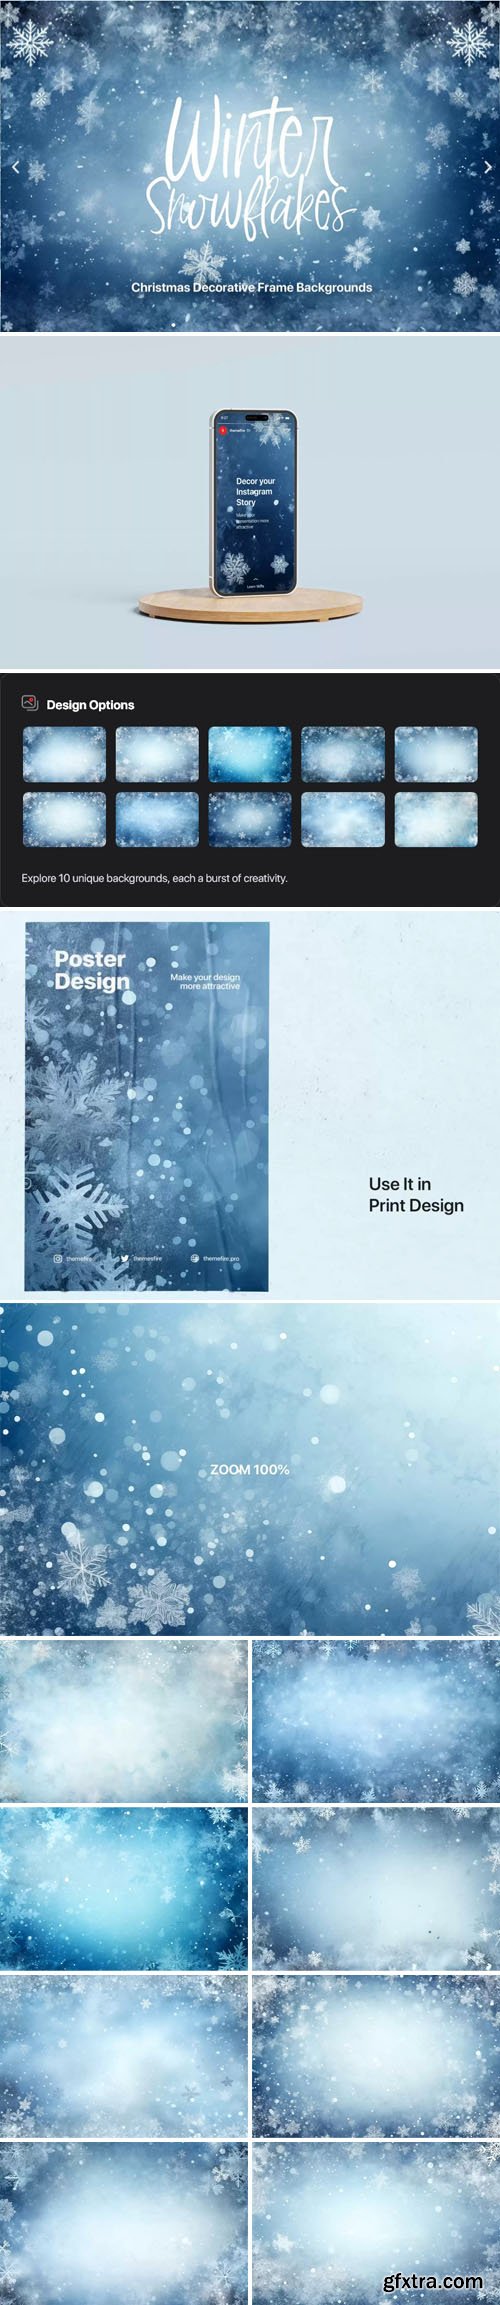 Winter Snowflakes - Decorative Frame Textures Pack